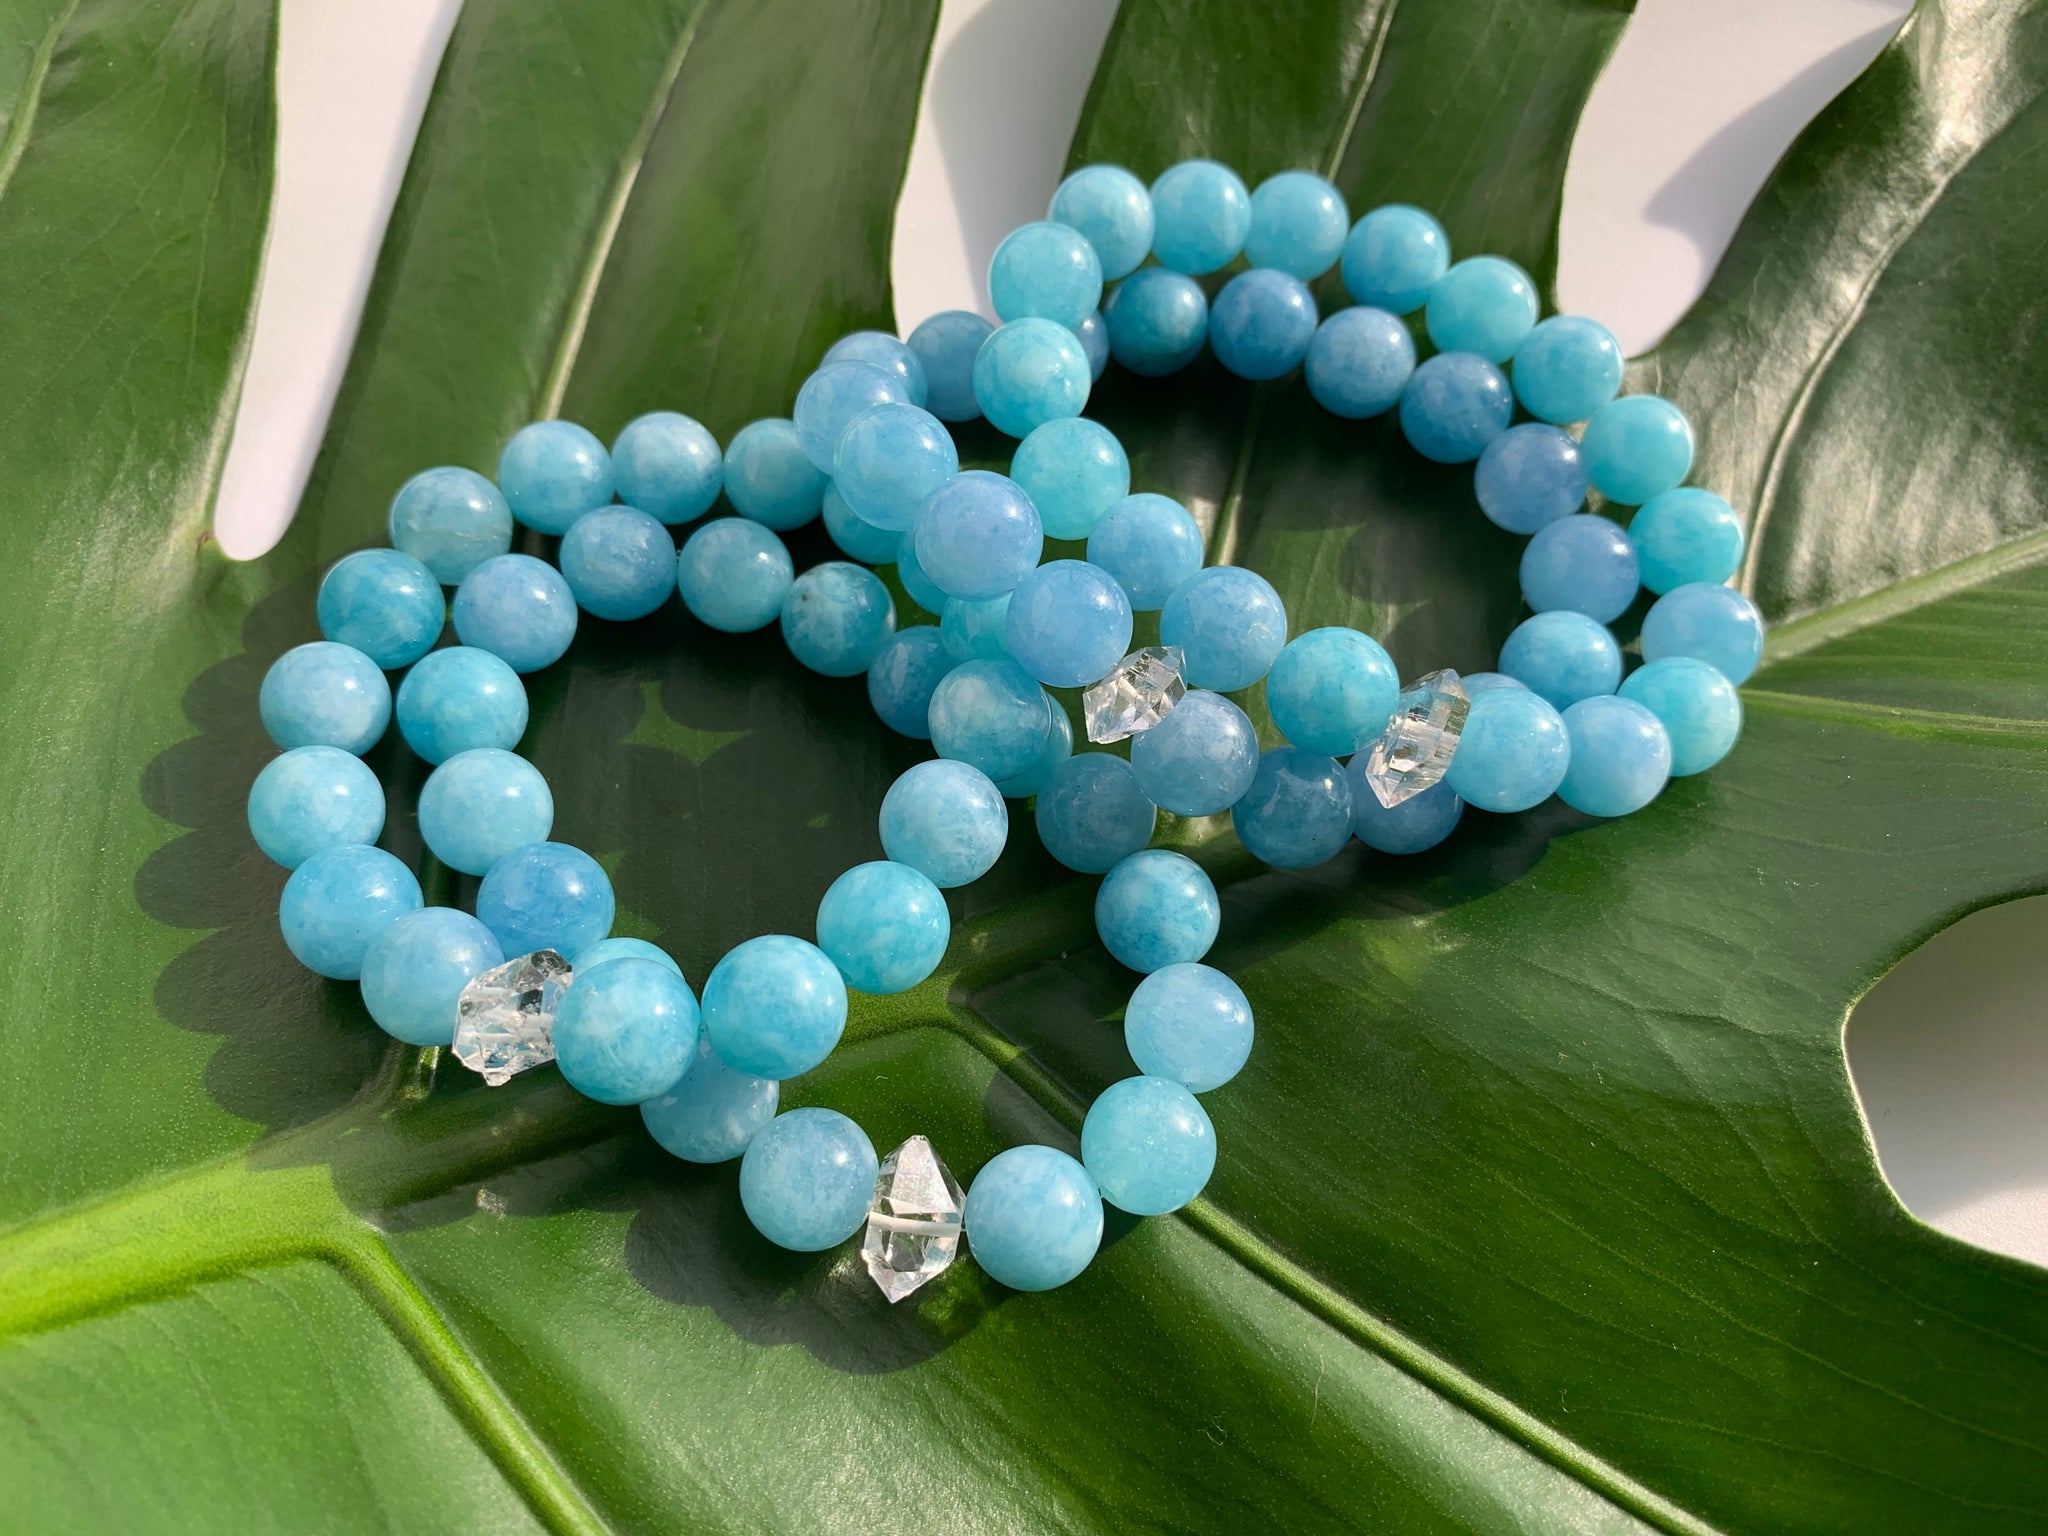 Amazon.com: Aquamarine, Blue, March birthstone, Gorgeous Handmade Bracelet  | Beaded Jewelry, 925 Sterling Silver Adjustable Chain 8 inch, Natural  Healing Crystal, Jewelry for Spiritual Energy, Protection, Beauty :  Handmade Products